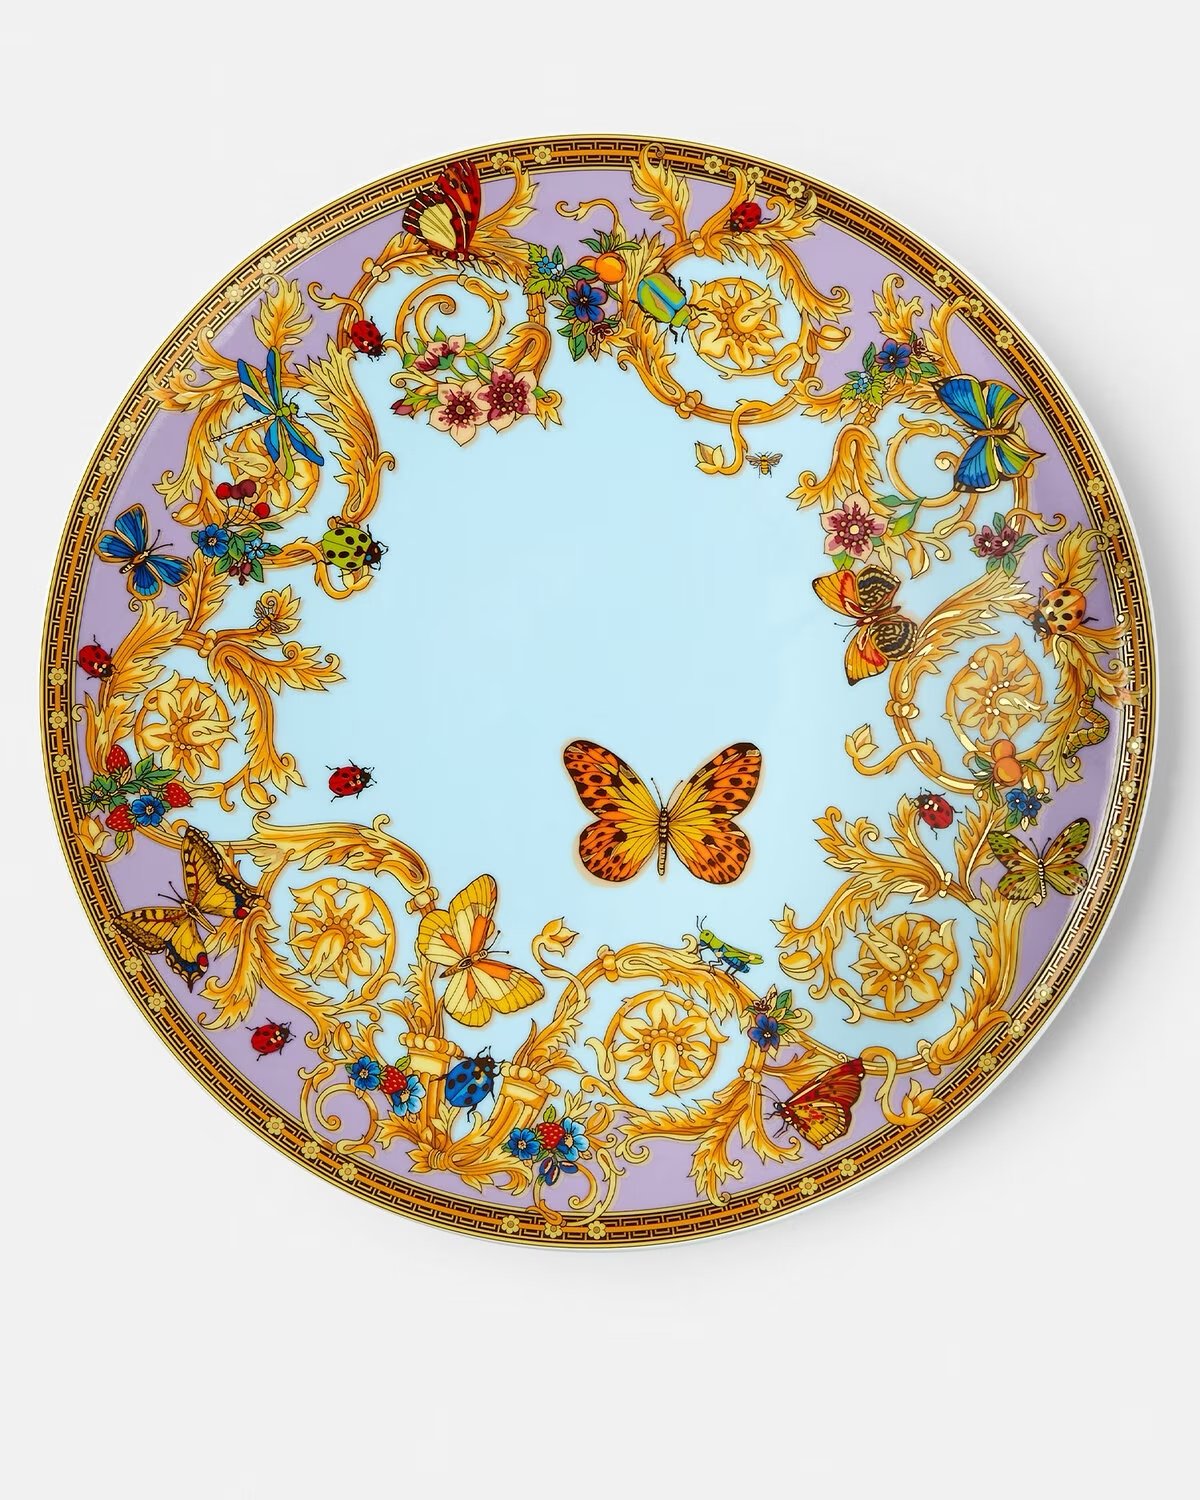 Versace Rosenthal Le Jardin charger plate